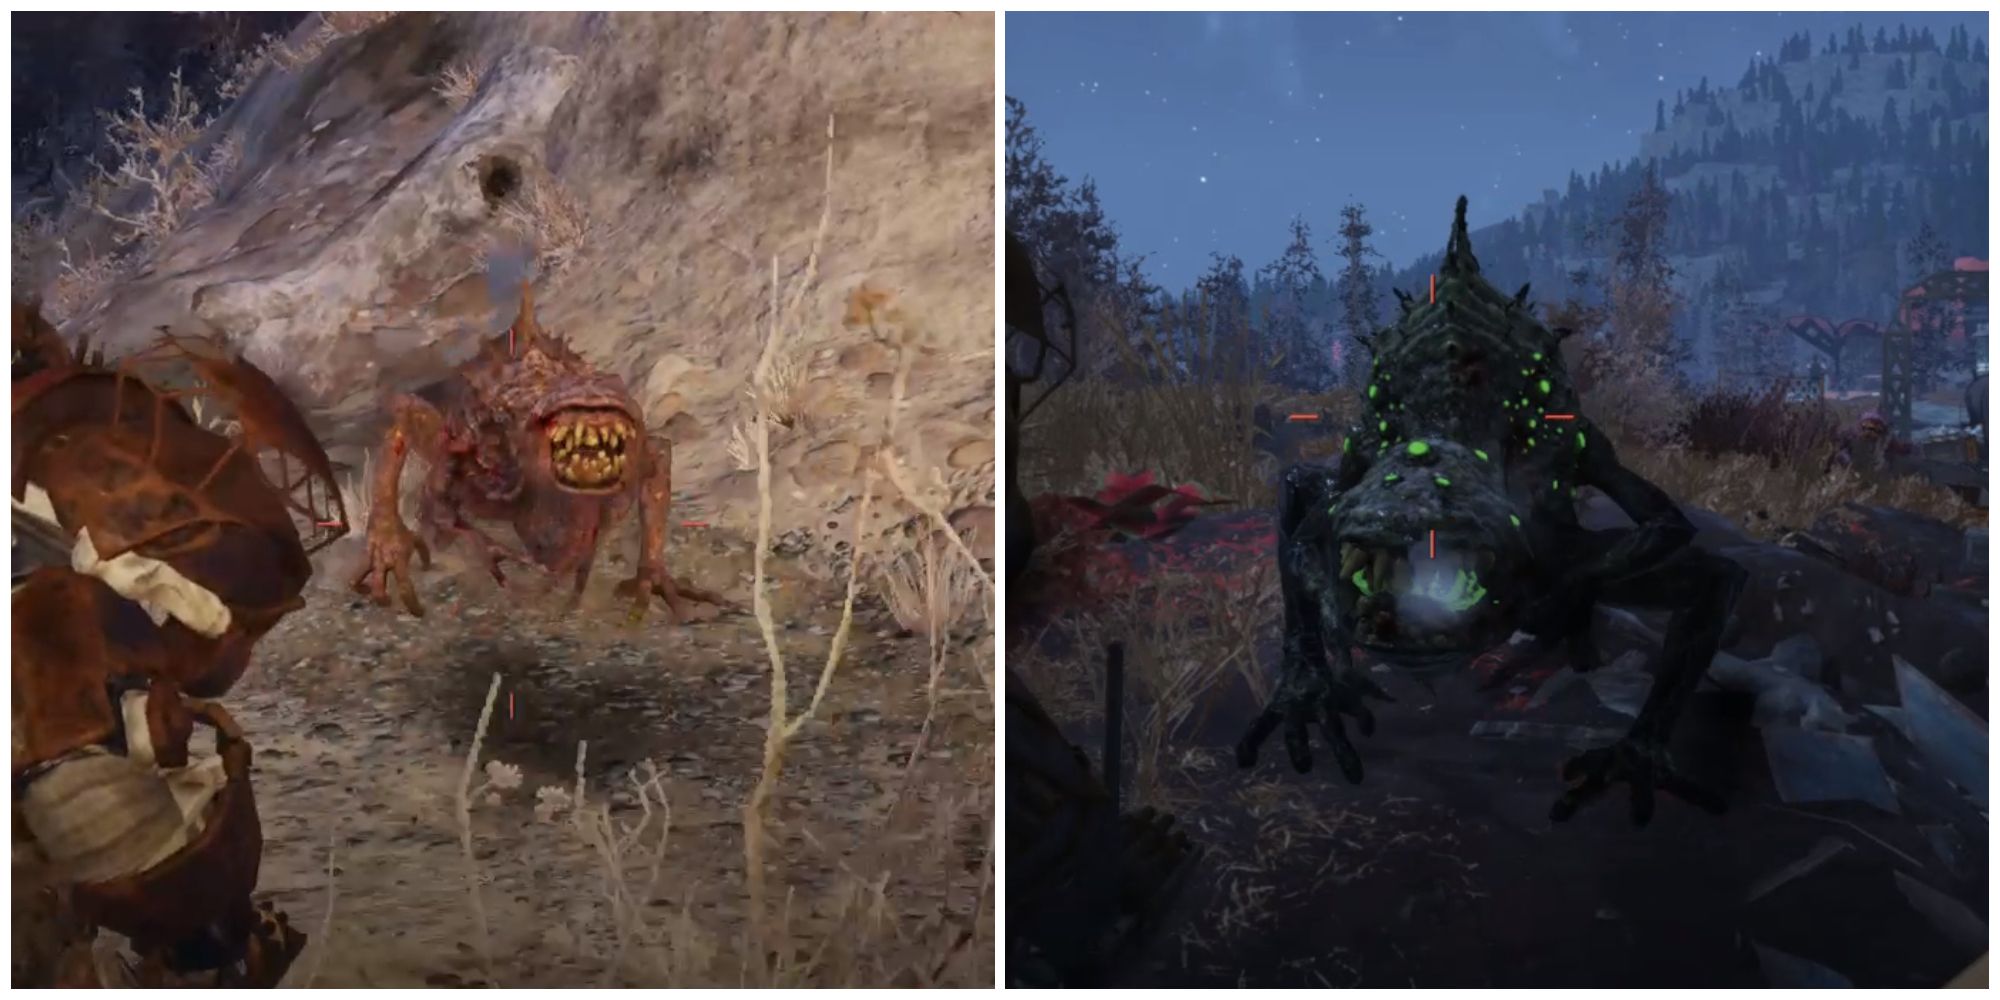 Split image of a snallygaster and a glowing snallygaster in Fallout 76